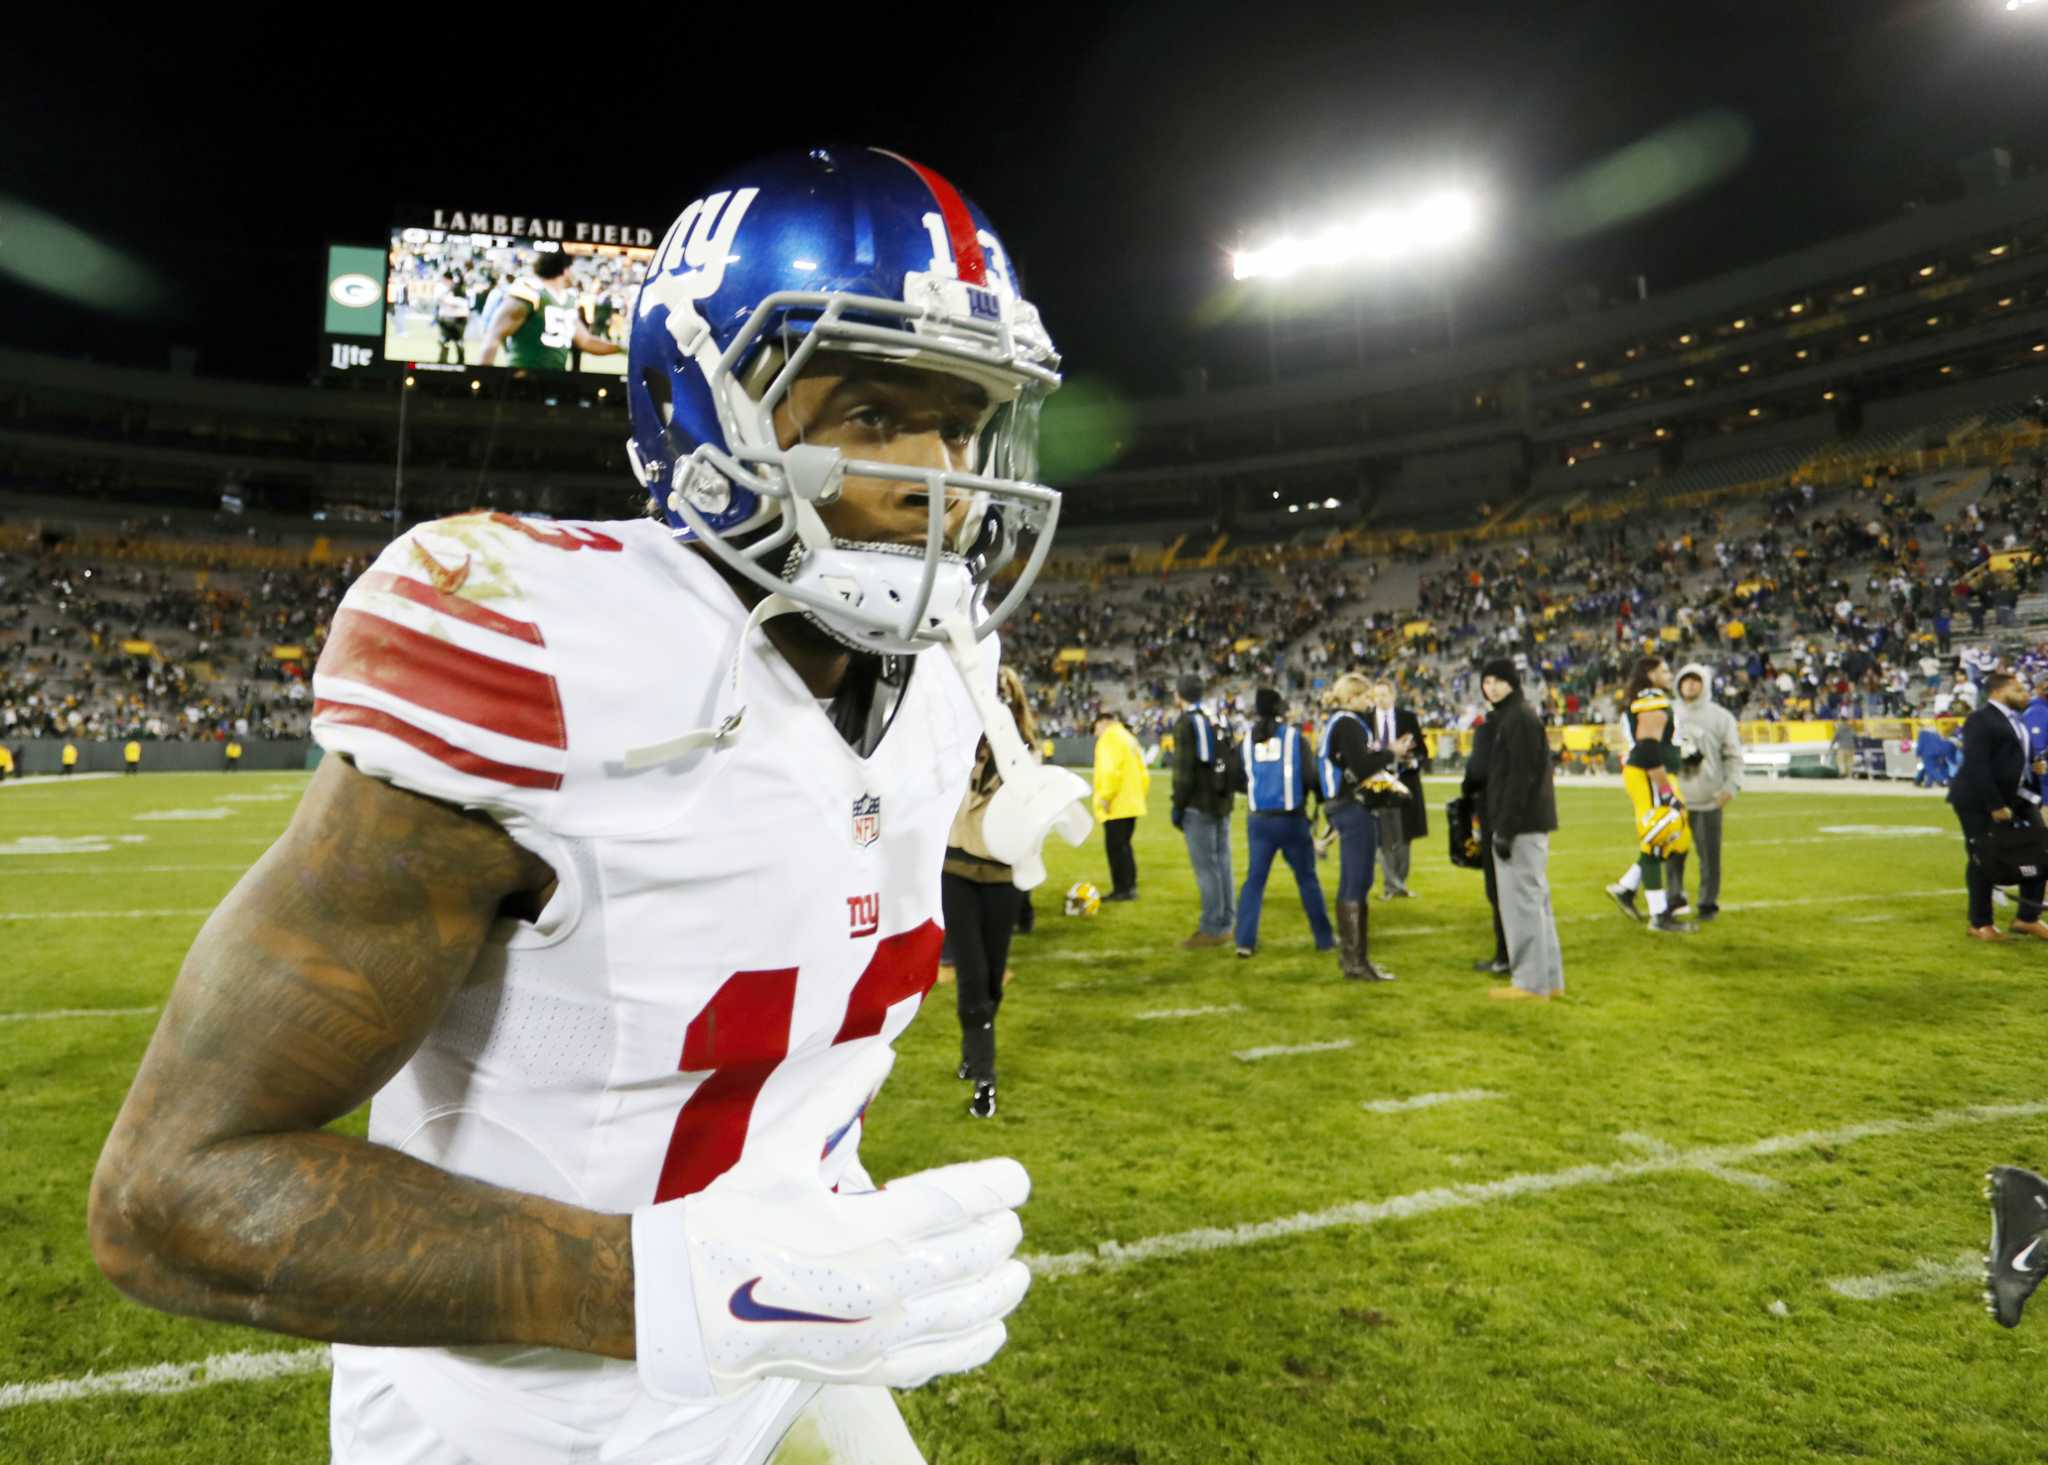 New York Giants' Odell Beckham Jr.: 'It's great to be back on the field